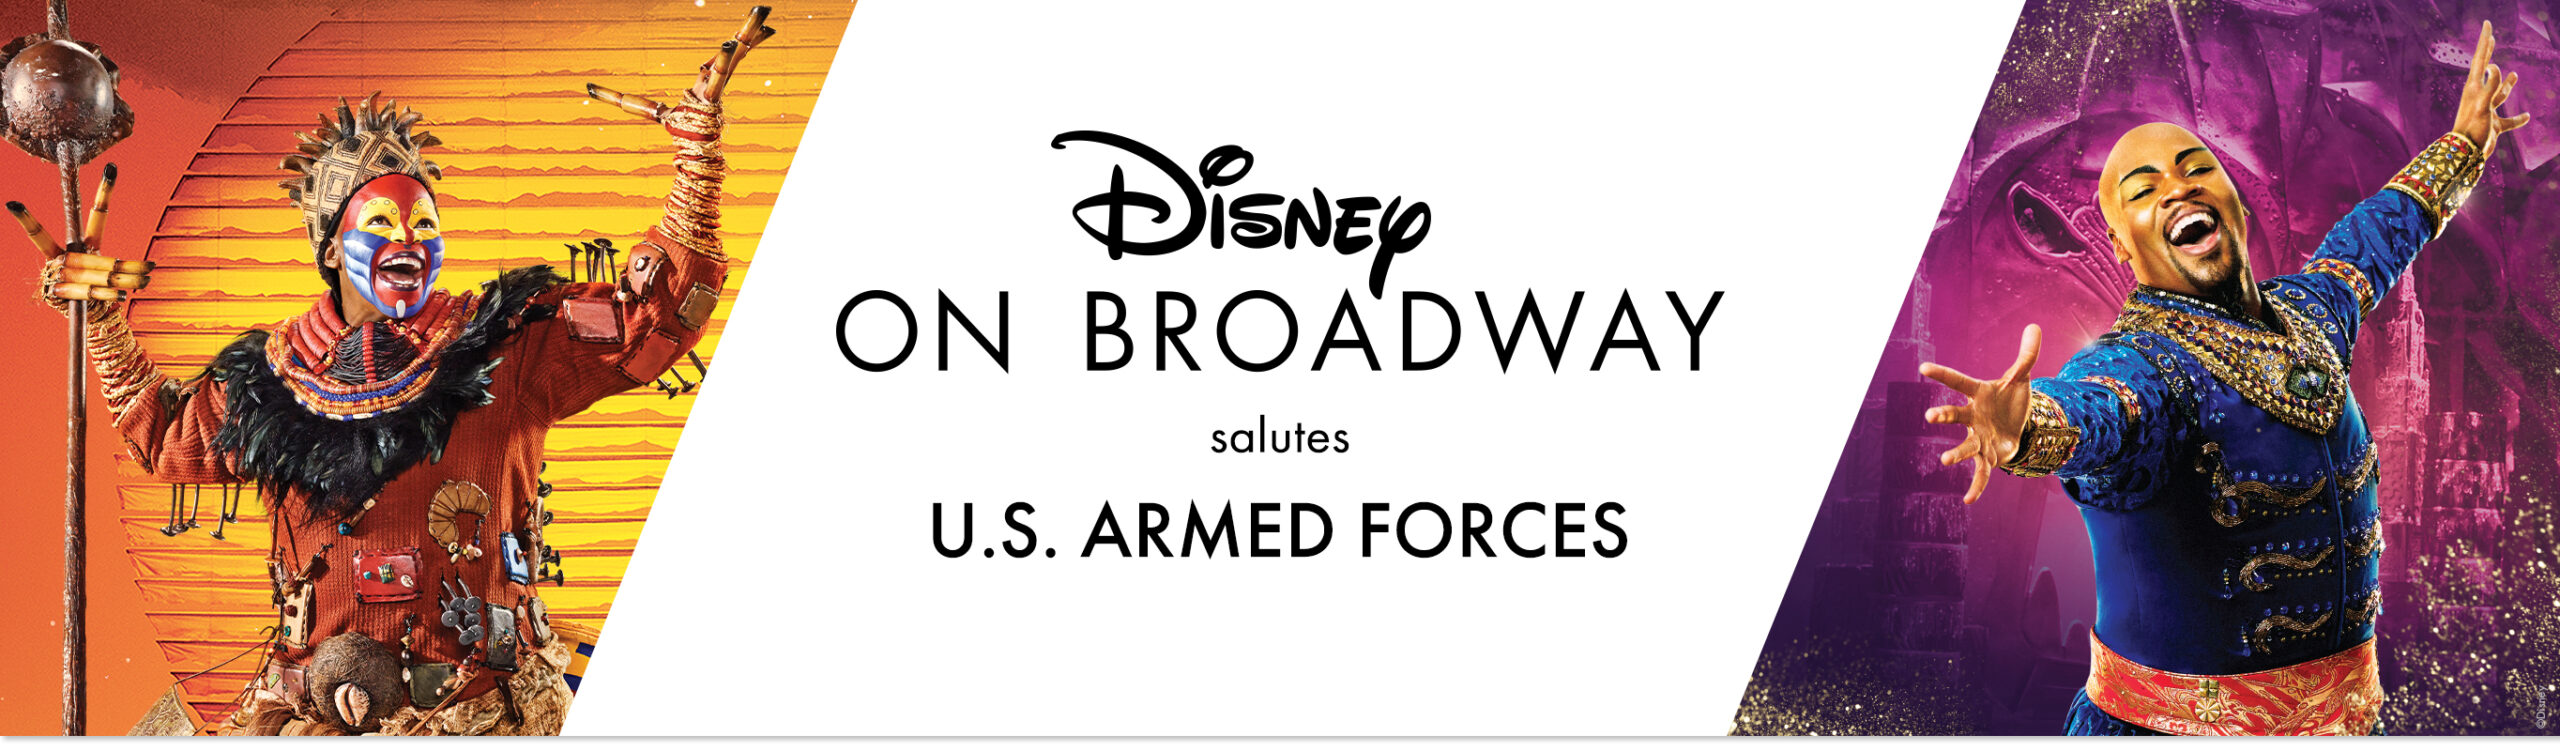 Disney on Broadway Salutes U.S. ARMED FORCES